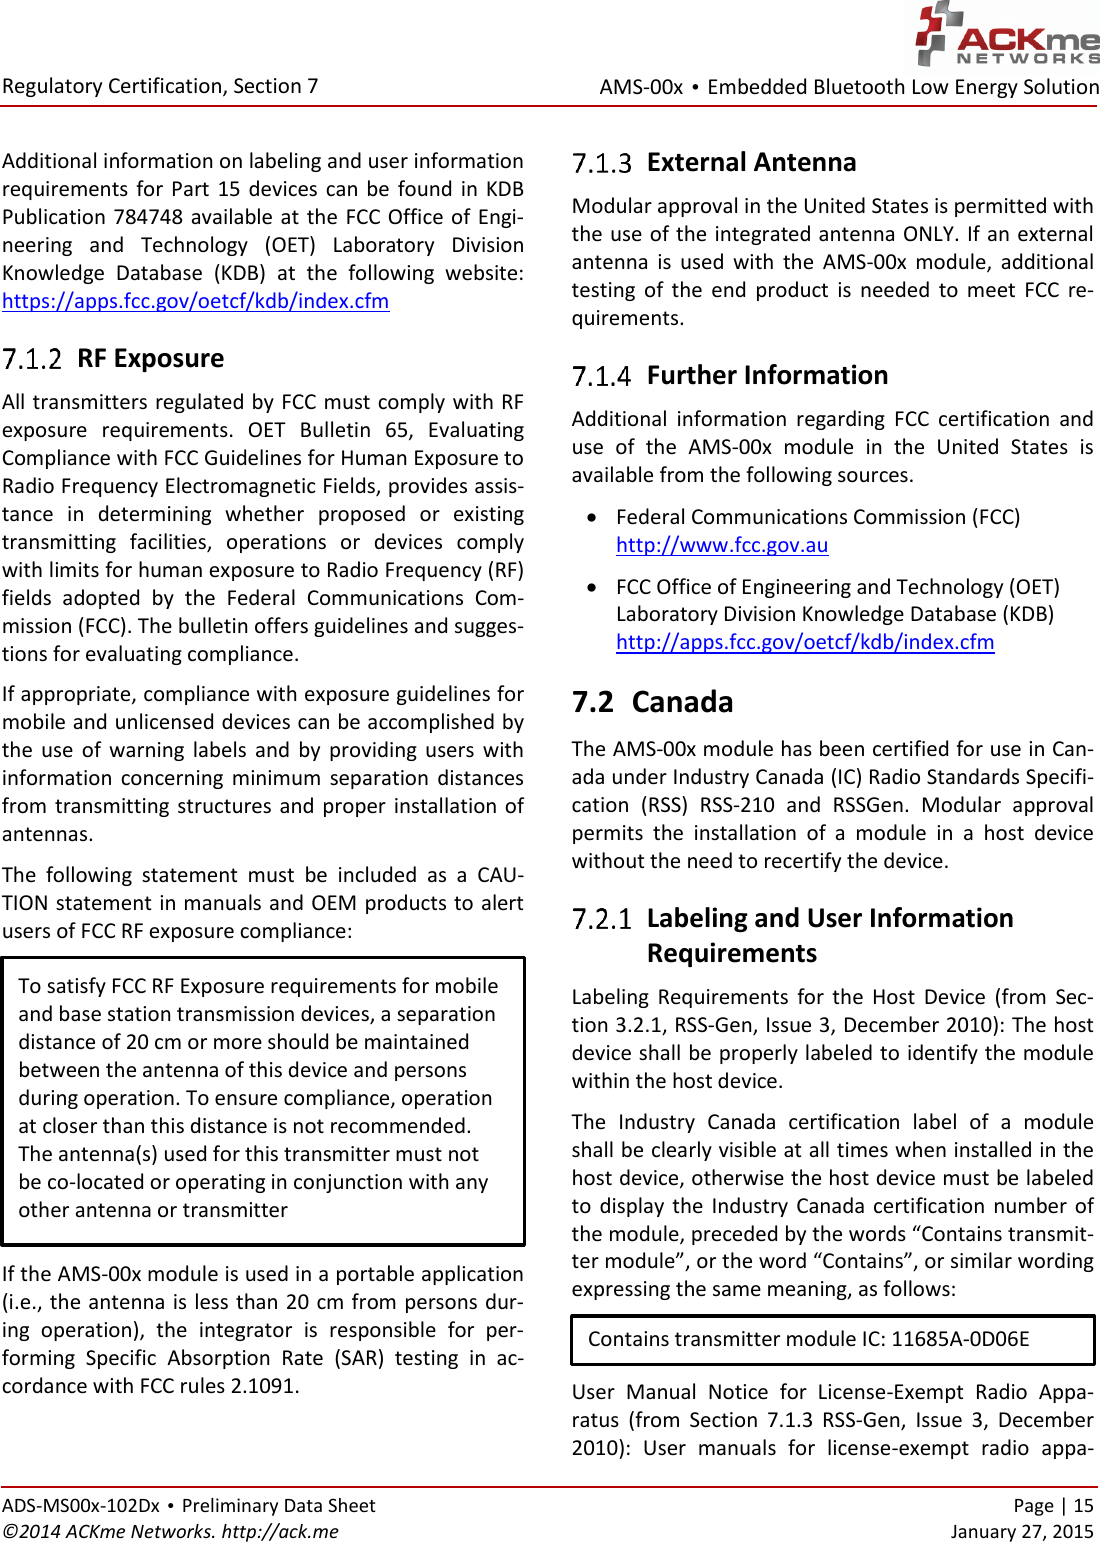 AMS-00x • Embedded Bluetooth Low Energy Solution  Regulatory Certification, Section 7 ADS-MS00x-102Dx • Preliminary Data Sheet    Page | 15 ©2014 ACKme Networks. http://ack.me    January 27, 2015  Additional information on labeling and user information requirements for Part  15  devices  can  be  found in  KDB Publication 784748 available at the FCC  Office  of  Engi-neering  and  Technology  (OET)  Laboratory  Division Knowledge  Database  (KDB)  at  the  following  website: https://apps.fcc.gov/oetcf/kdb/index.cfm  RF Exposure All transmitters regulated by FCC must comply with RF exposure  requirements.  OET  Bulletin  65,  Evaluating Compliance with FCC Guidelines for Human Exposure to Radio Frequency Electromagnetic Fields, provides assis-tance  in  determining  whether  proposed  or  existing transmitting  facilities,  operations  or  devices  comply with limits for human exposure to Radio Frequency (RF) fields  adopted  by  the  Federal  Communications  Com-mission (FCC). The bulletin offers guidelines and sugges-tions for evaluating compliance. If appropriate, compliance with exposure guidelines for mobile and unlicensed devices can be accomplished by the  use  of  warning  labels  and  by  providing  users  with information  concerning  minimum  separation  distances from  transmitting structures and proper installation of antennas. The  following  statement  must  be  included  as  a  CAU-TION statement in manuals and OEM products to alert users of FCC RF exposure compliance:  If the AMS-00x module is used in a portable application (i.e., the antenna is less than 20 cm from persons dur-ing  operation),  the  integrator  is  responsible  for  per-forming  Specific  Absorption  Rate  (SAR)  testing  in  ac-cordance with FCC rules 2.1091.  External Antenna Modular approval in the United States is permitted with the use of the integrated antenna ONLY. If an external antenna  is  used  with  the  AMS-00x  module,  additional testing  of  the  end  product  is  needed  to  meet  FCC  re-quirements.  Further Information Additional  information  regarding  FCC  certification  and use  of  the  AMS-00x  module  in  the  United  States  is available from the following sources.  Federal Communications Commission (FCC) http://www.fcc.gov.au  FCC Office of Engineering and Technology (OET) Laboratory Division Knowledge Database (KDB) http://apps.fcc.gov/oetcf/kdb/index.cfm 7.2 Canada The AMS-00x module has been certified for use in Can-ada under Industry Canada (IC) Radio Standards Specifi-cation  (RSS)  RSS-210  and  RSSGen.  Modular  approval permits  the  installation  of  a  module  in  a  host  device without the need to recertify the device.  Labeling and User Information  Requirements Labeling  Requirements  for  the  Host  Device  (from  Sec-tion 3.2.1, RSS-Gen, Issue 3, December 2010): The host device shall be properly labeled to identify the module within the host device. The  Industry  Canada  certification  label  of  a  module shall be clearly visible at all times when installed in the host device, otherwise the host device must be labeled to  display the  Industry  Canada certification  number  of the module, preceded by the words “Contains transmit-ter module”, or the word “Contains”, or similar wording expressing the same meaning, as follows:  User  Manual  Notice  for  License-Exempt  Radio  Appa-ratus  (from  Section  7.1.3  RSS-Gen,  Issue  3,  December 2010):  User  manuals  for  license-exempt  radio  appa-To satisfy FCC RF Exposure requirements for mobile and base station transmission devices, a separation distance of 20 cm or more should be maintained between the antenna of this device and persons during operation. To ensure compliance, operation at closer than this distance is not recommended. The antenna(s) used for this transmitter must not be co-located or operating in conjunction with any other antenna or transmitter Contains transmitter module IC: 11685A-0D06E  